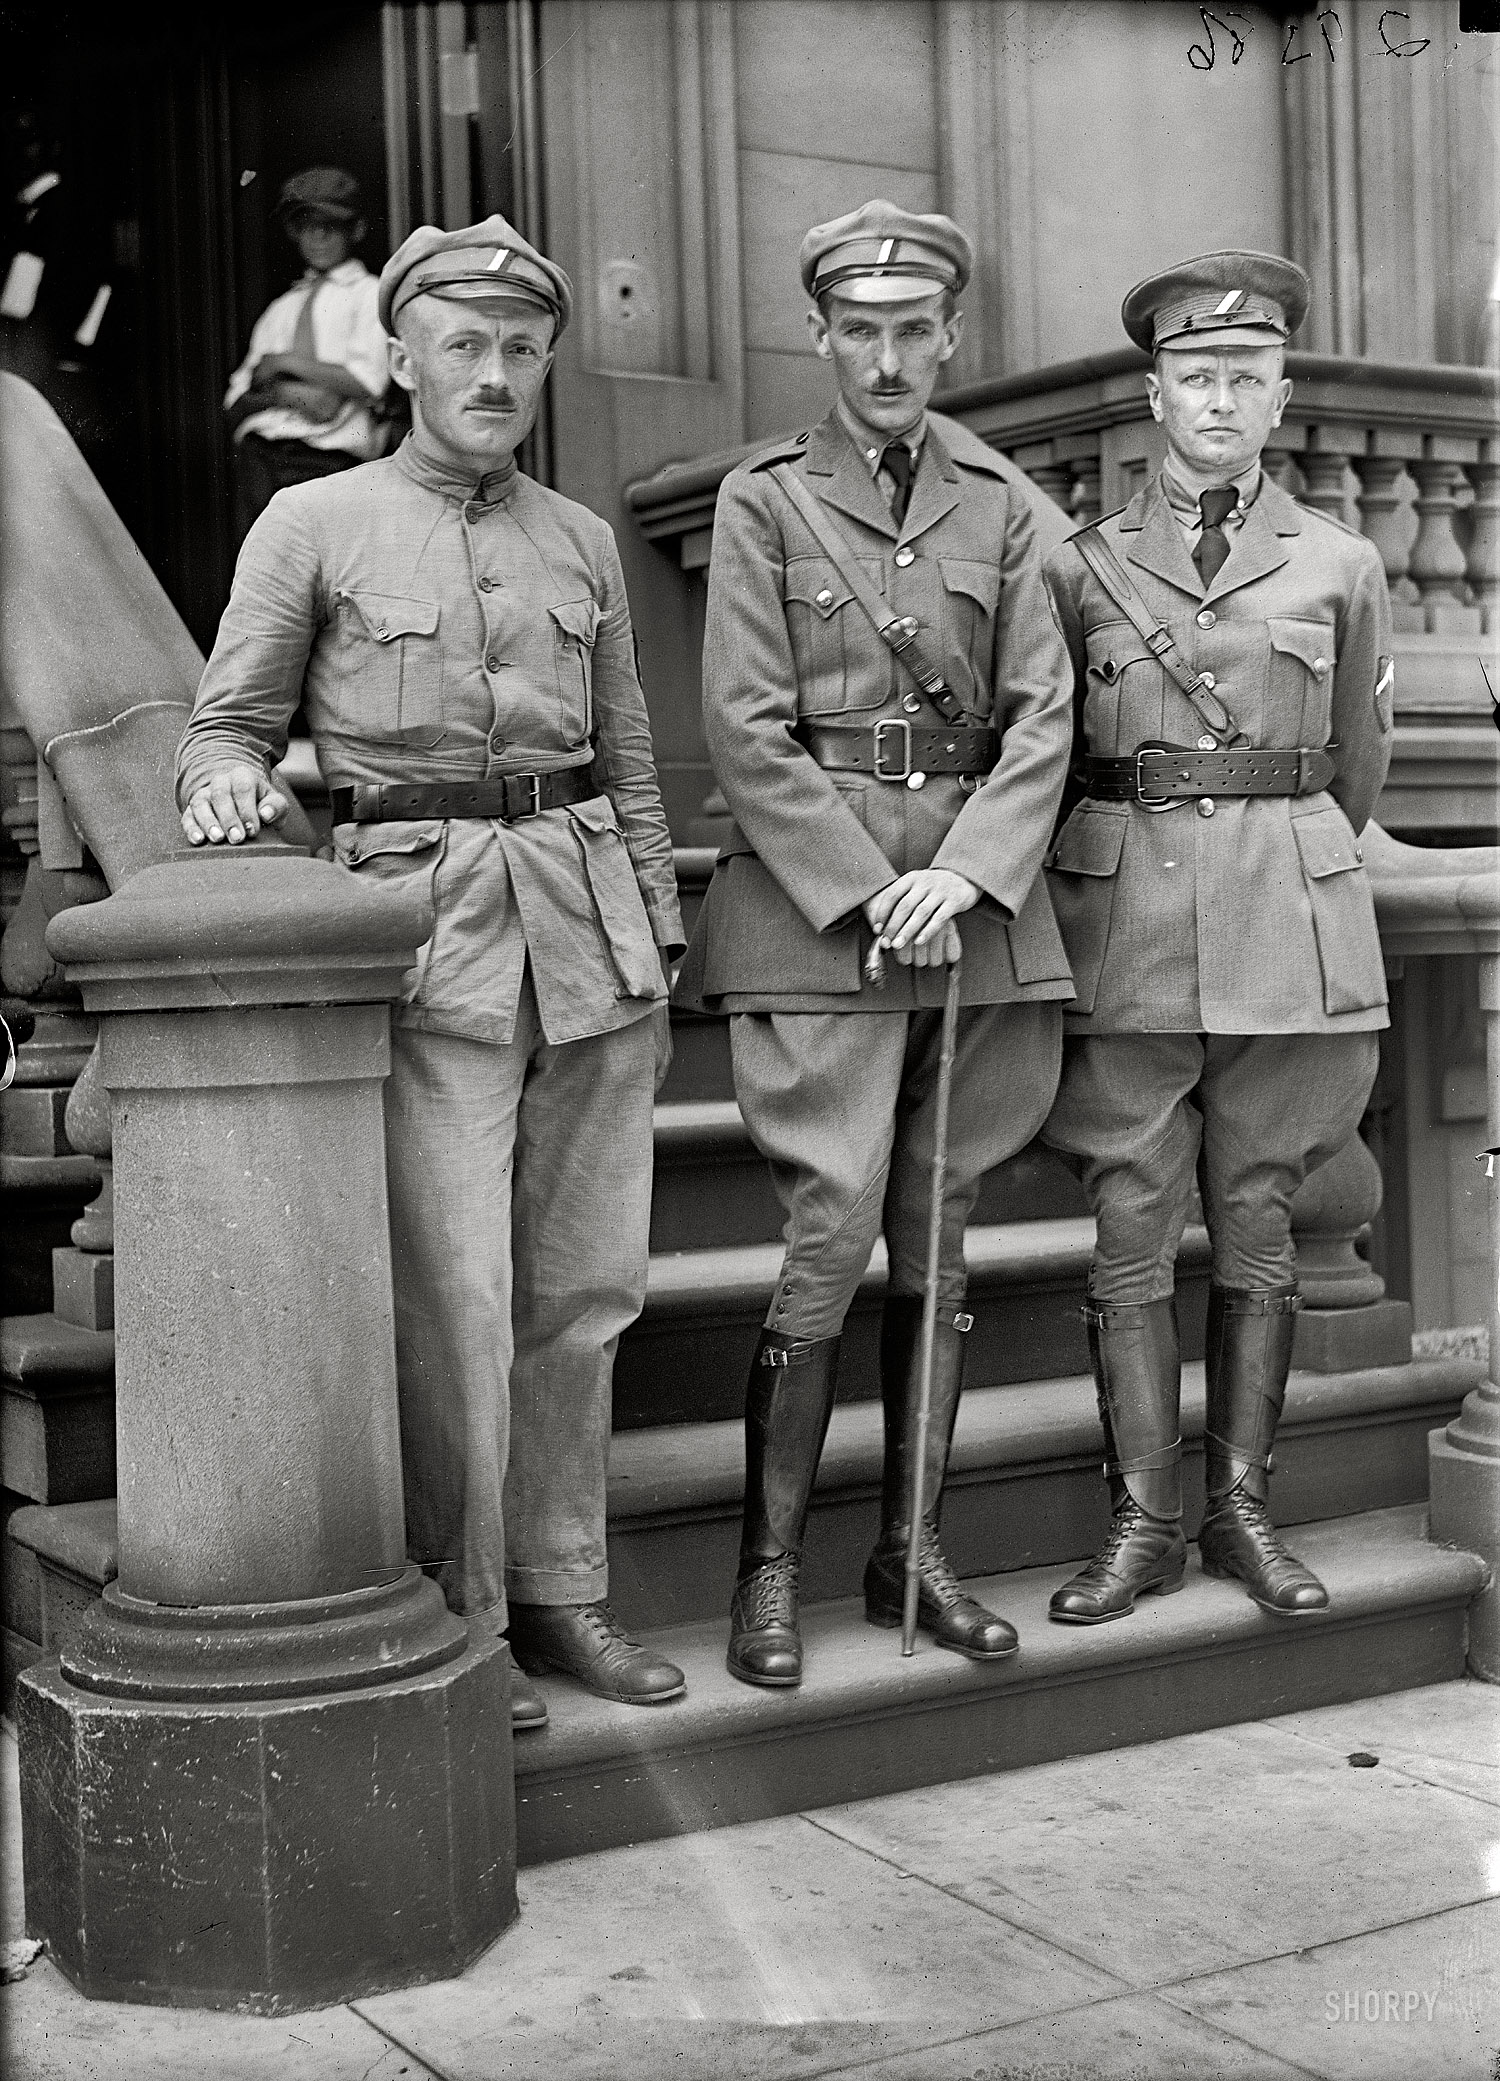 Washington circa 1918. The caption for this one is "no caption." Anybody here look familiar? Harris & Ewing Collection glass negative. View full size.
Update: These officers were members of the Czech Legion; in the middle is Capt. Vladimir Hurban. Thanks to Anonymous and Stanton Square for this info.